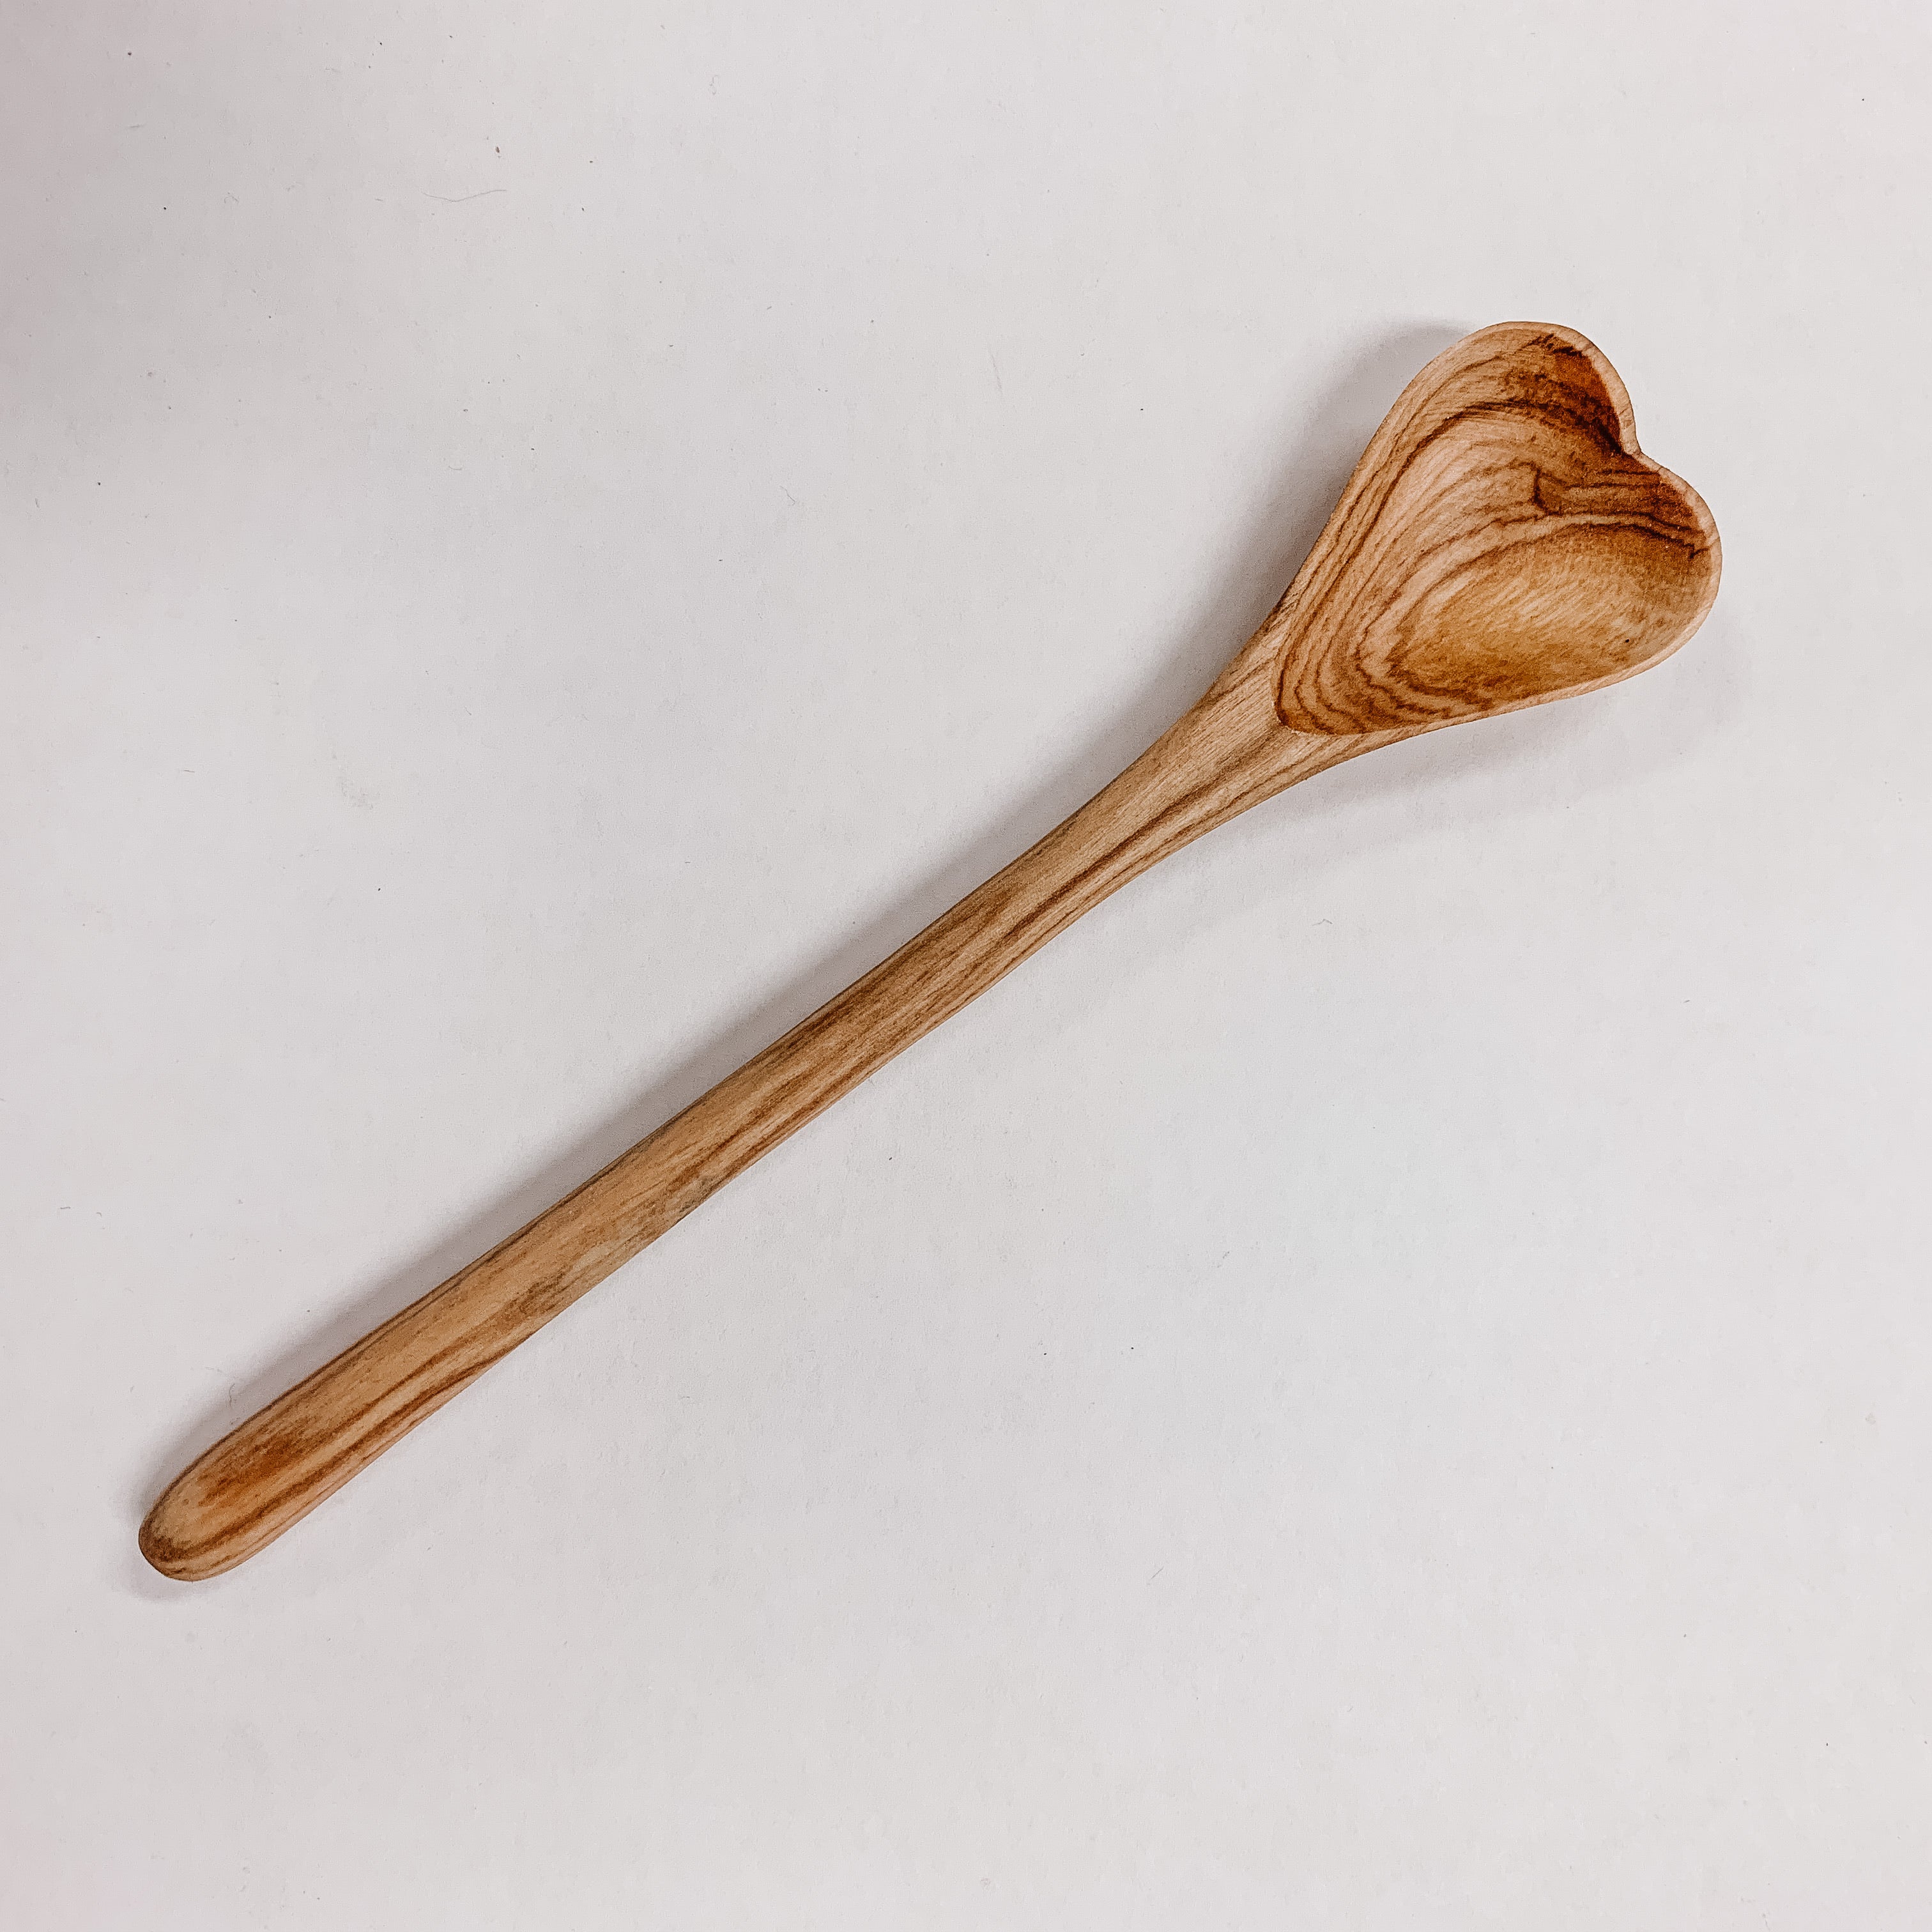 JustOne's tea spoon with the scoop in the shape of a heart, handcrafted in Kenya